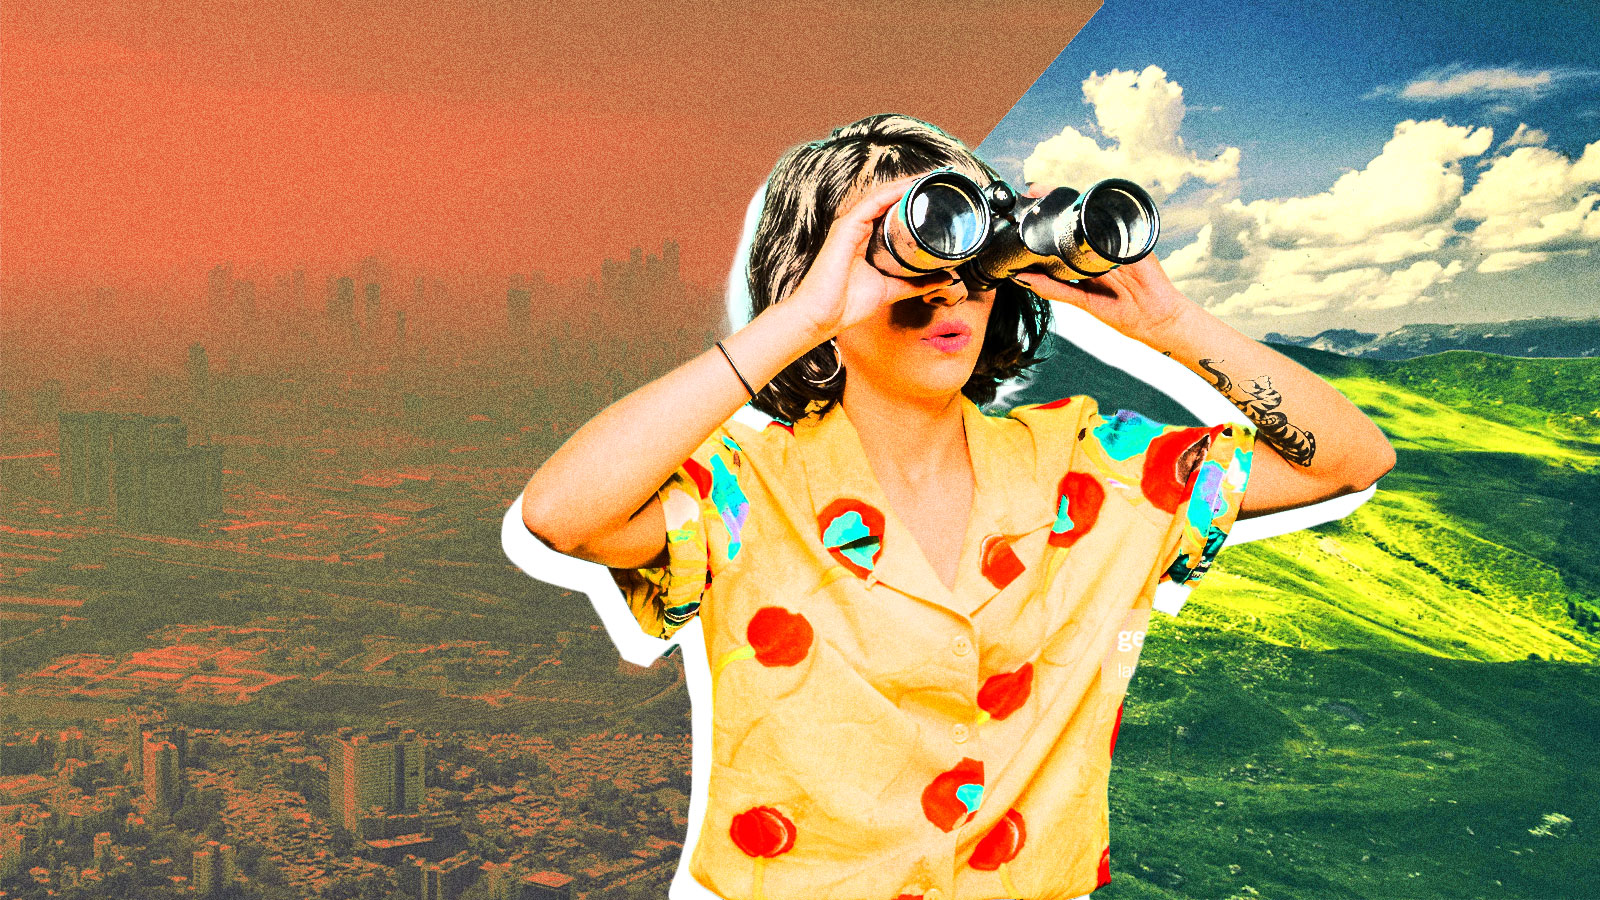 A woman looking through binoculars with a split screen of a smoggy city and green valley behind her